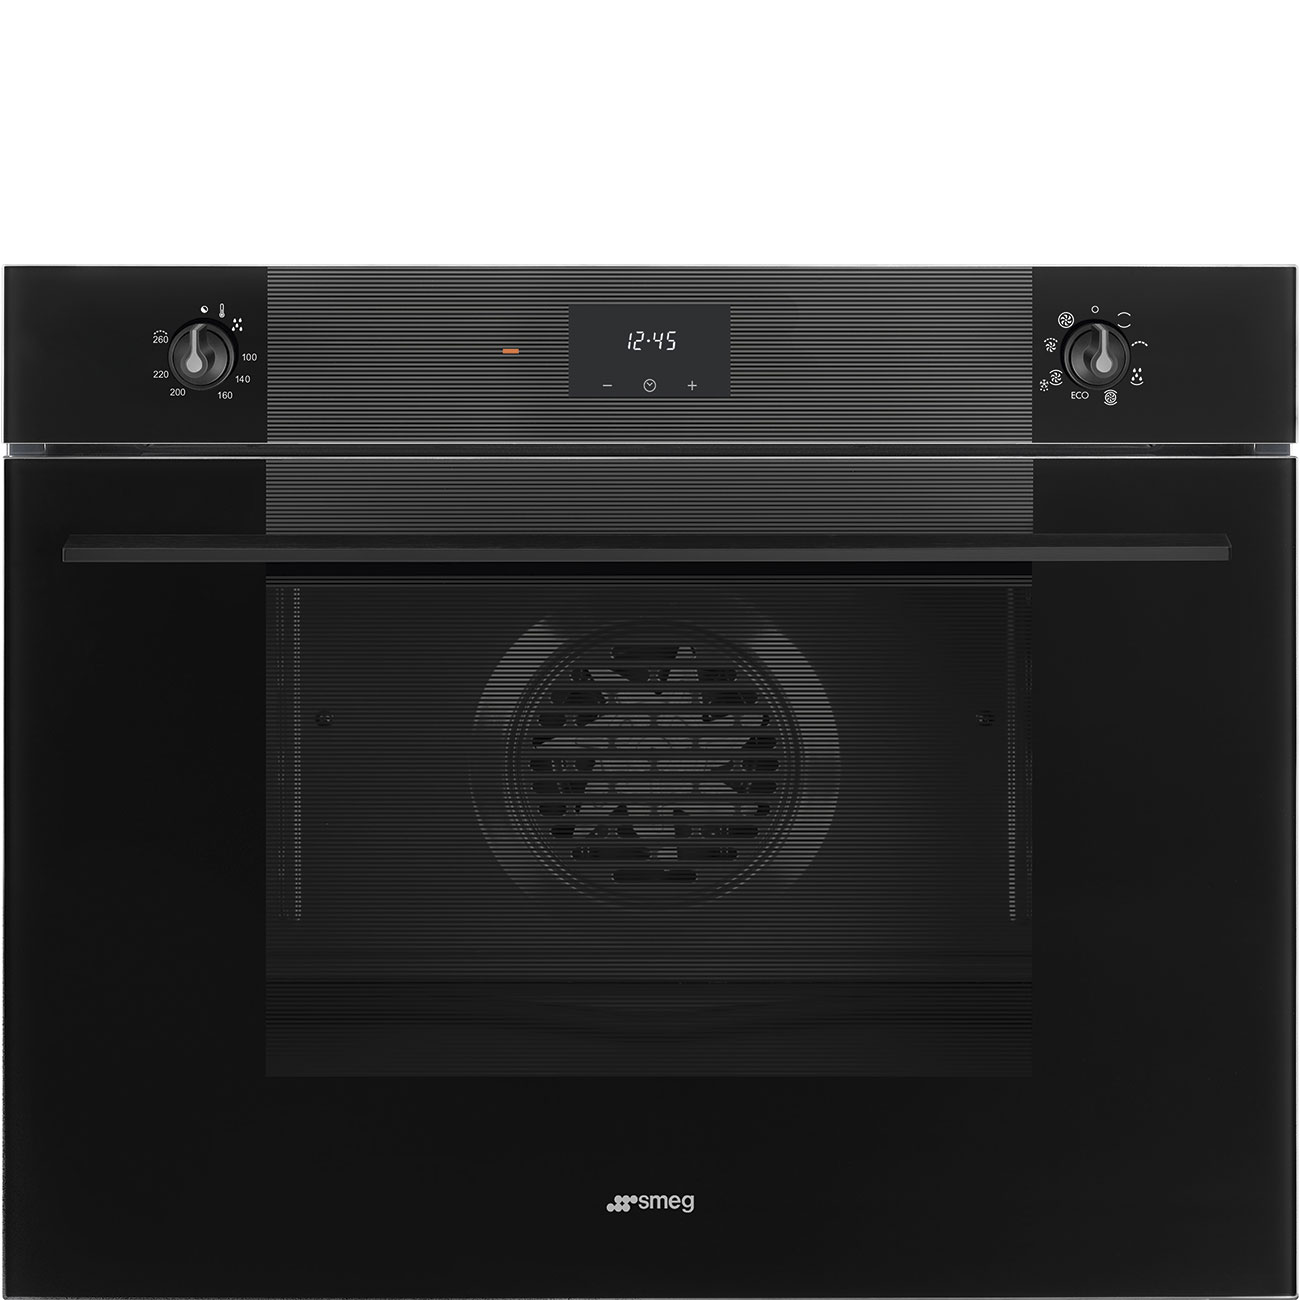 Oven Thermo-ventilated 75 cm Smeg_1